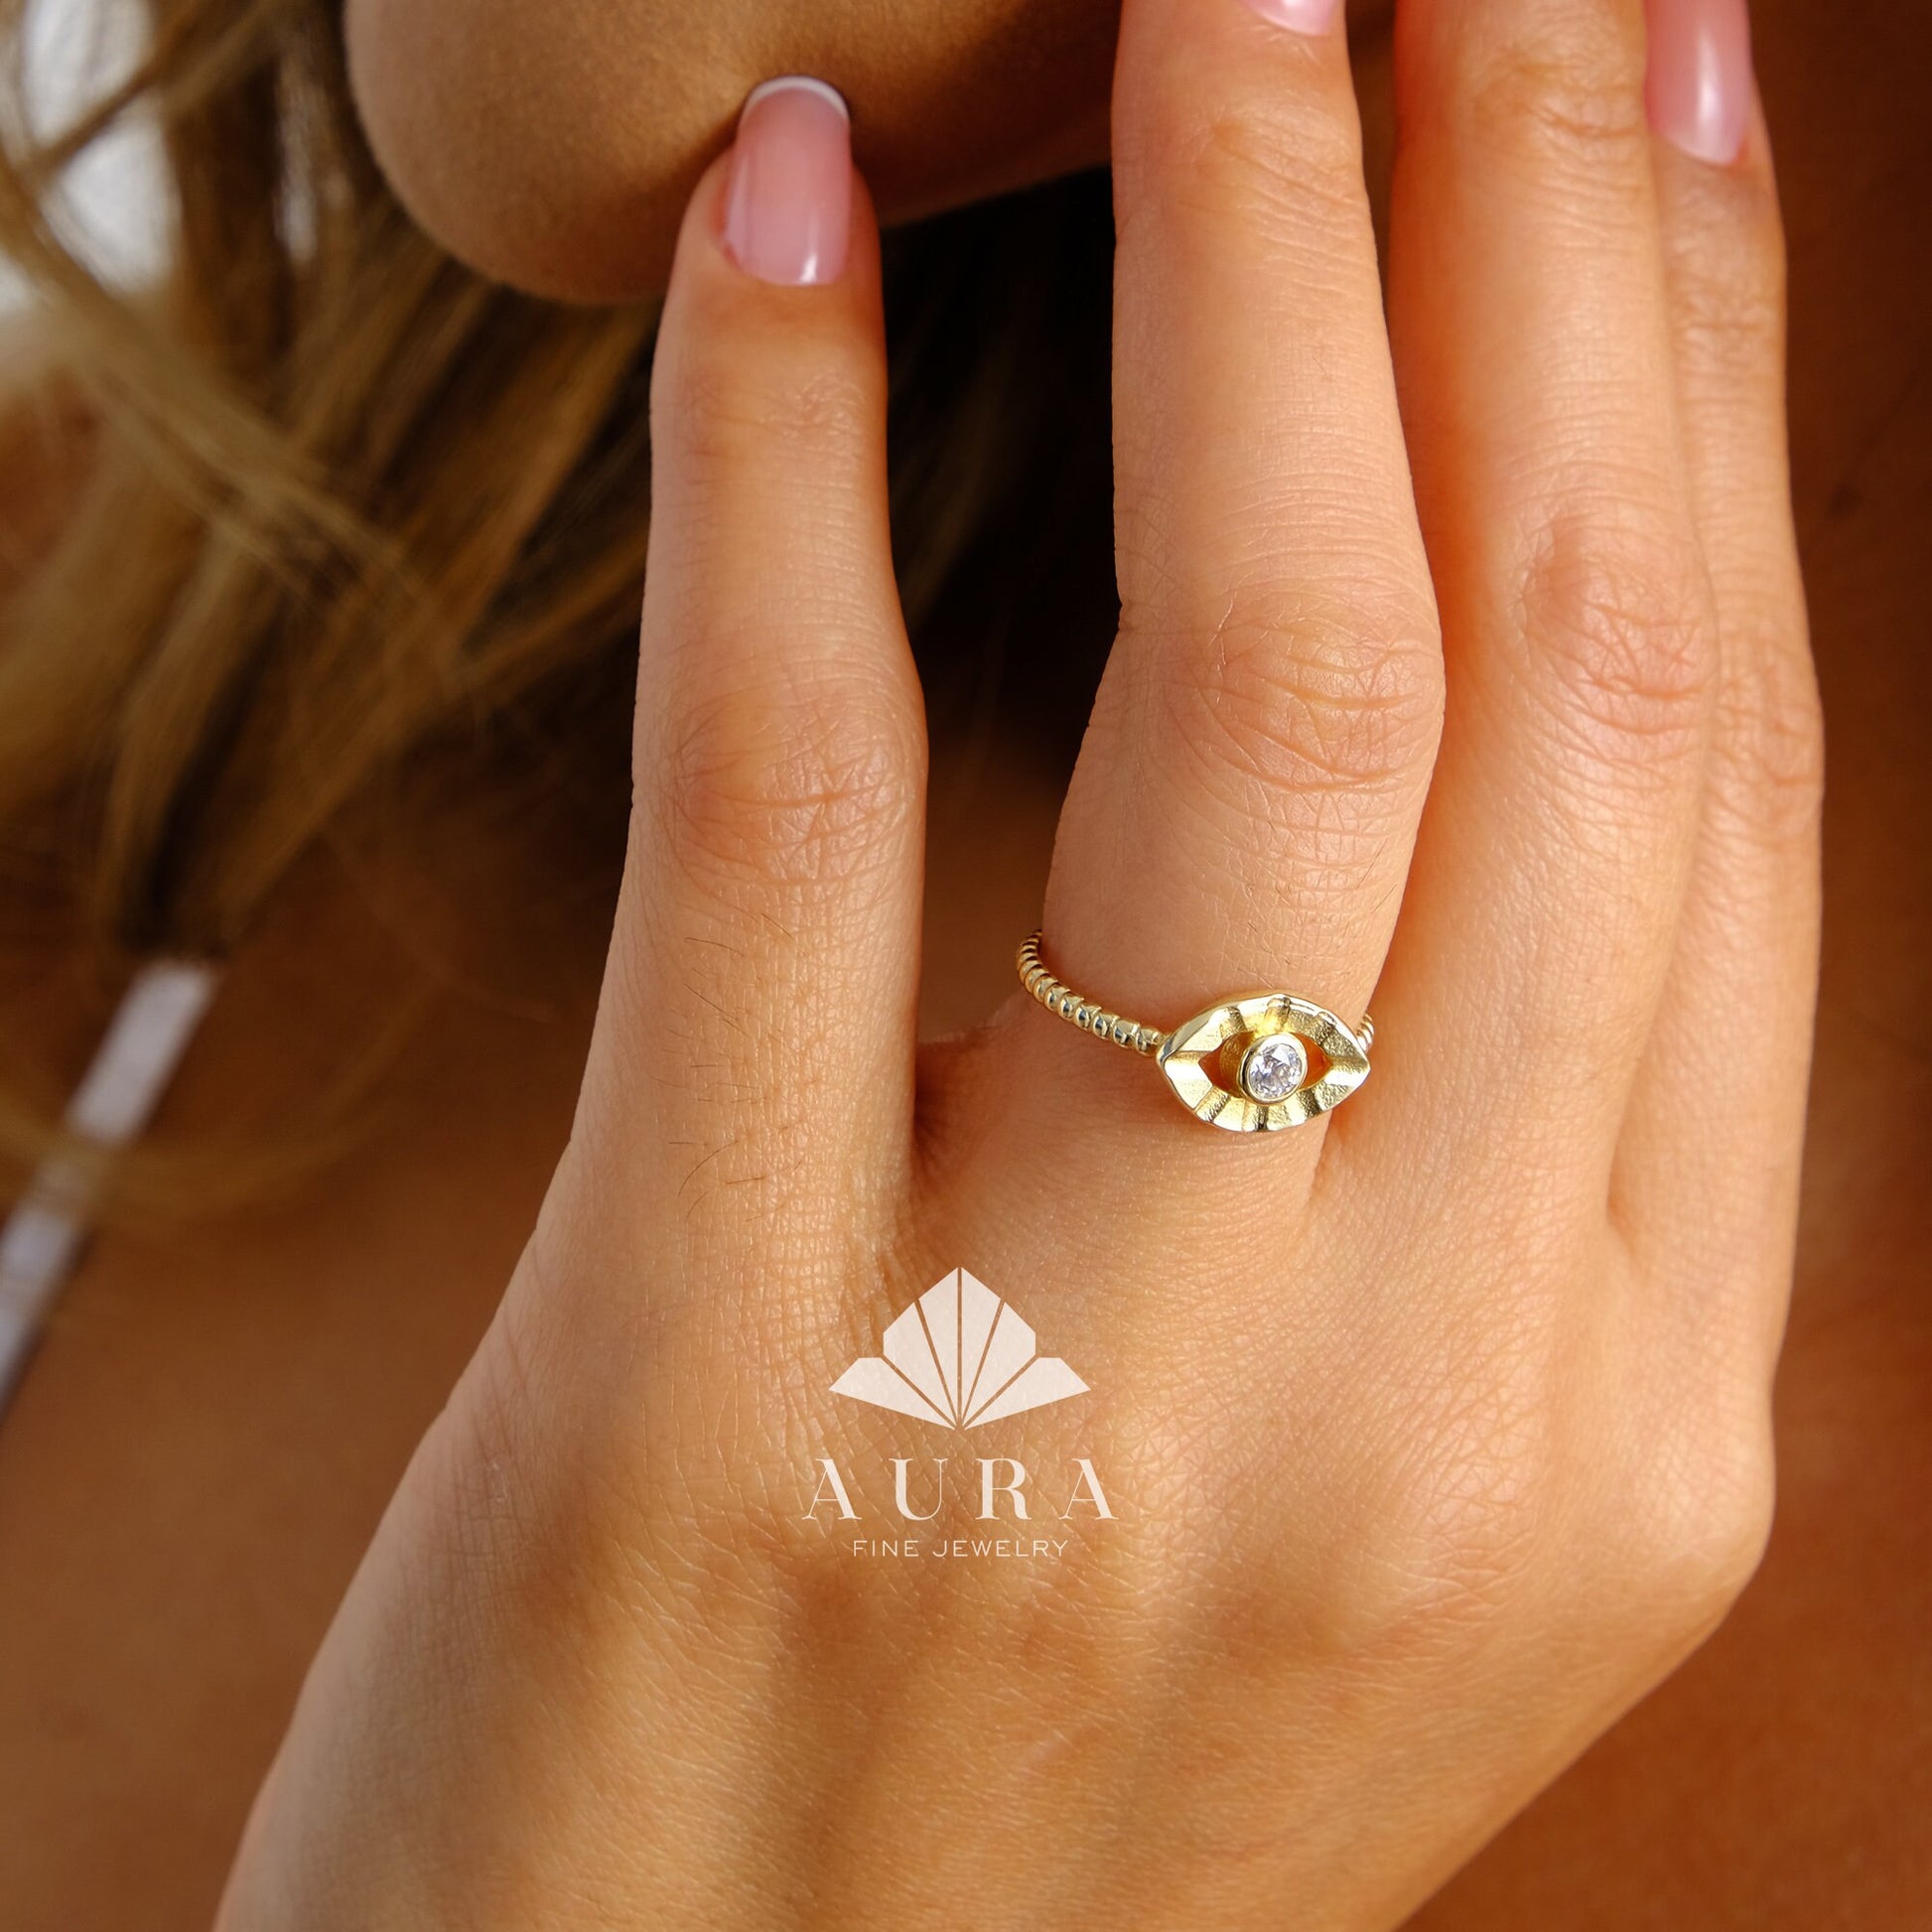 14K Gold Birthstone Ring, Personalized Solitaire Ring, Custom Eye Gemstone Ring, Gemstone Ring Mothers, Good Luck Ring, Protection Ring